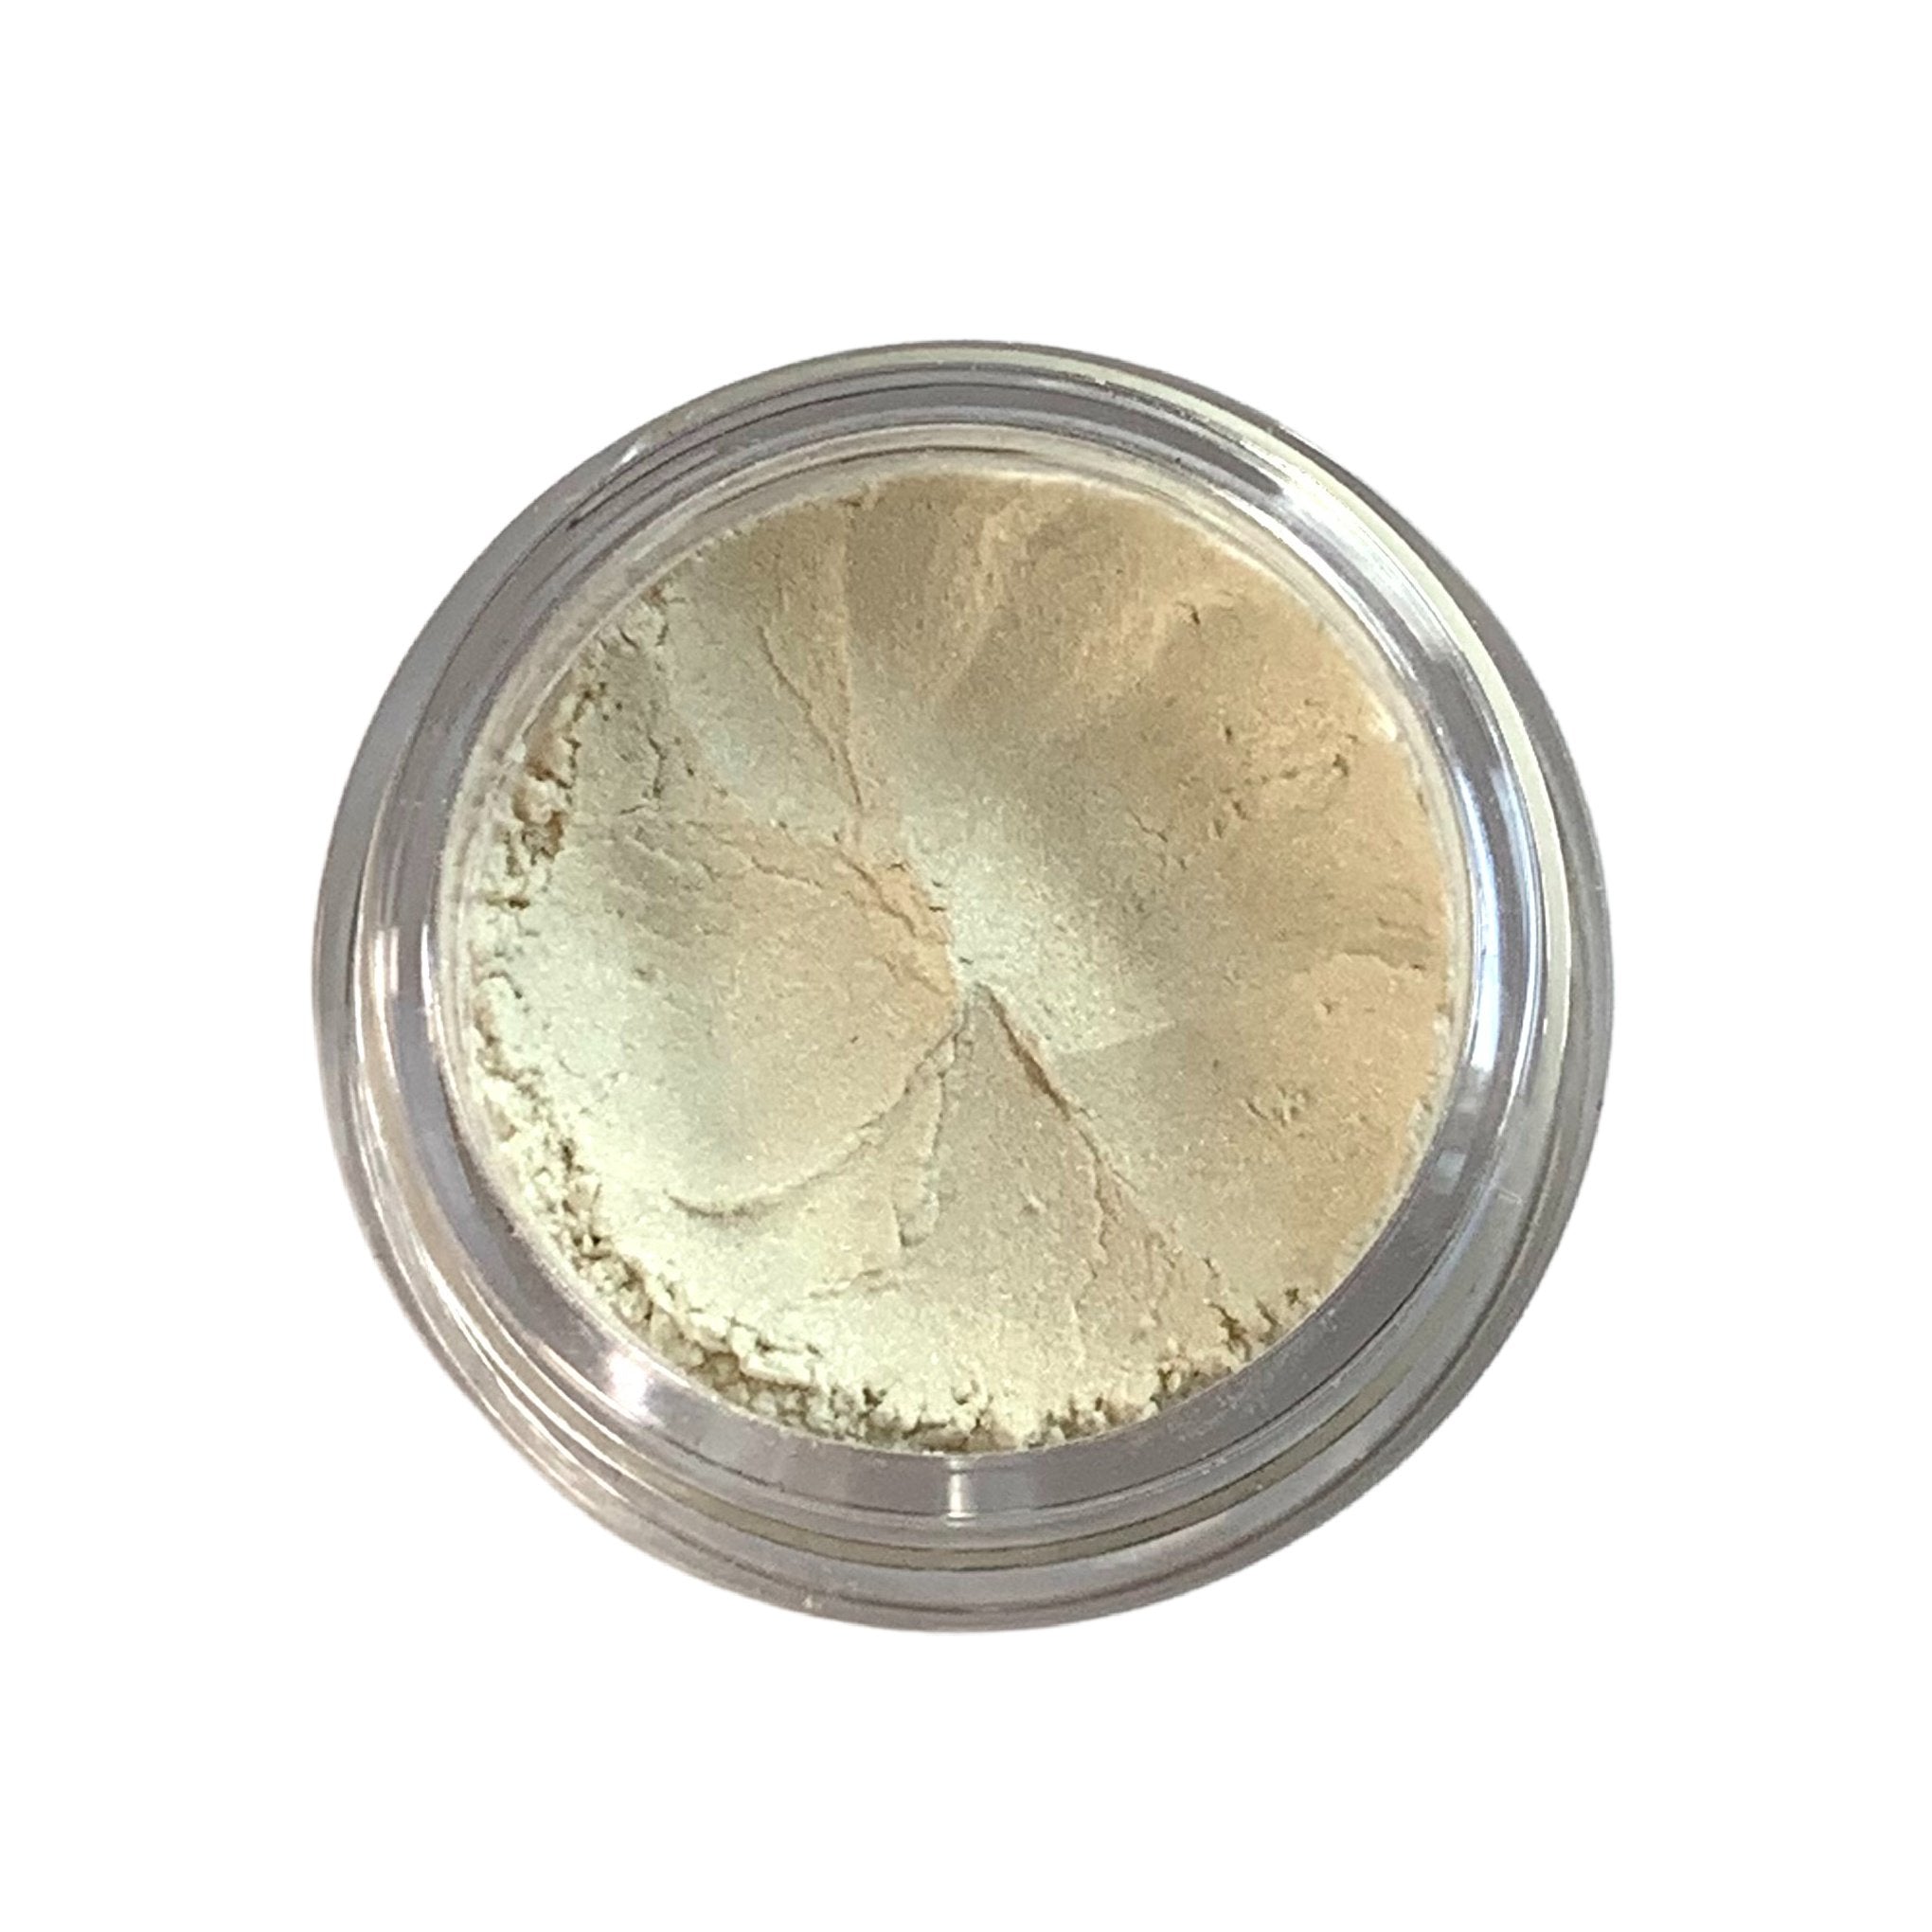 creamy white loose mineral eyeshadow in a 10gram sifter jar. vegan and cruelty free